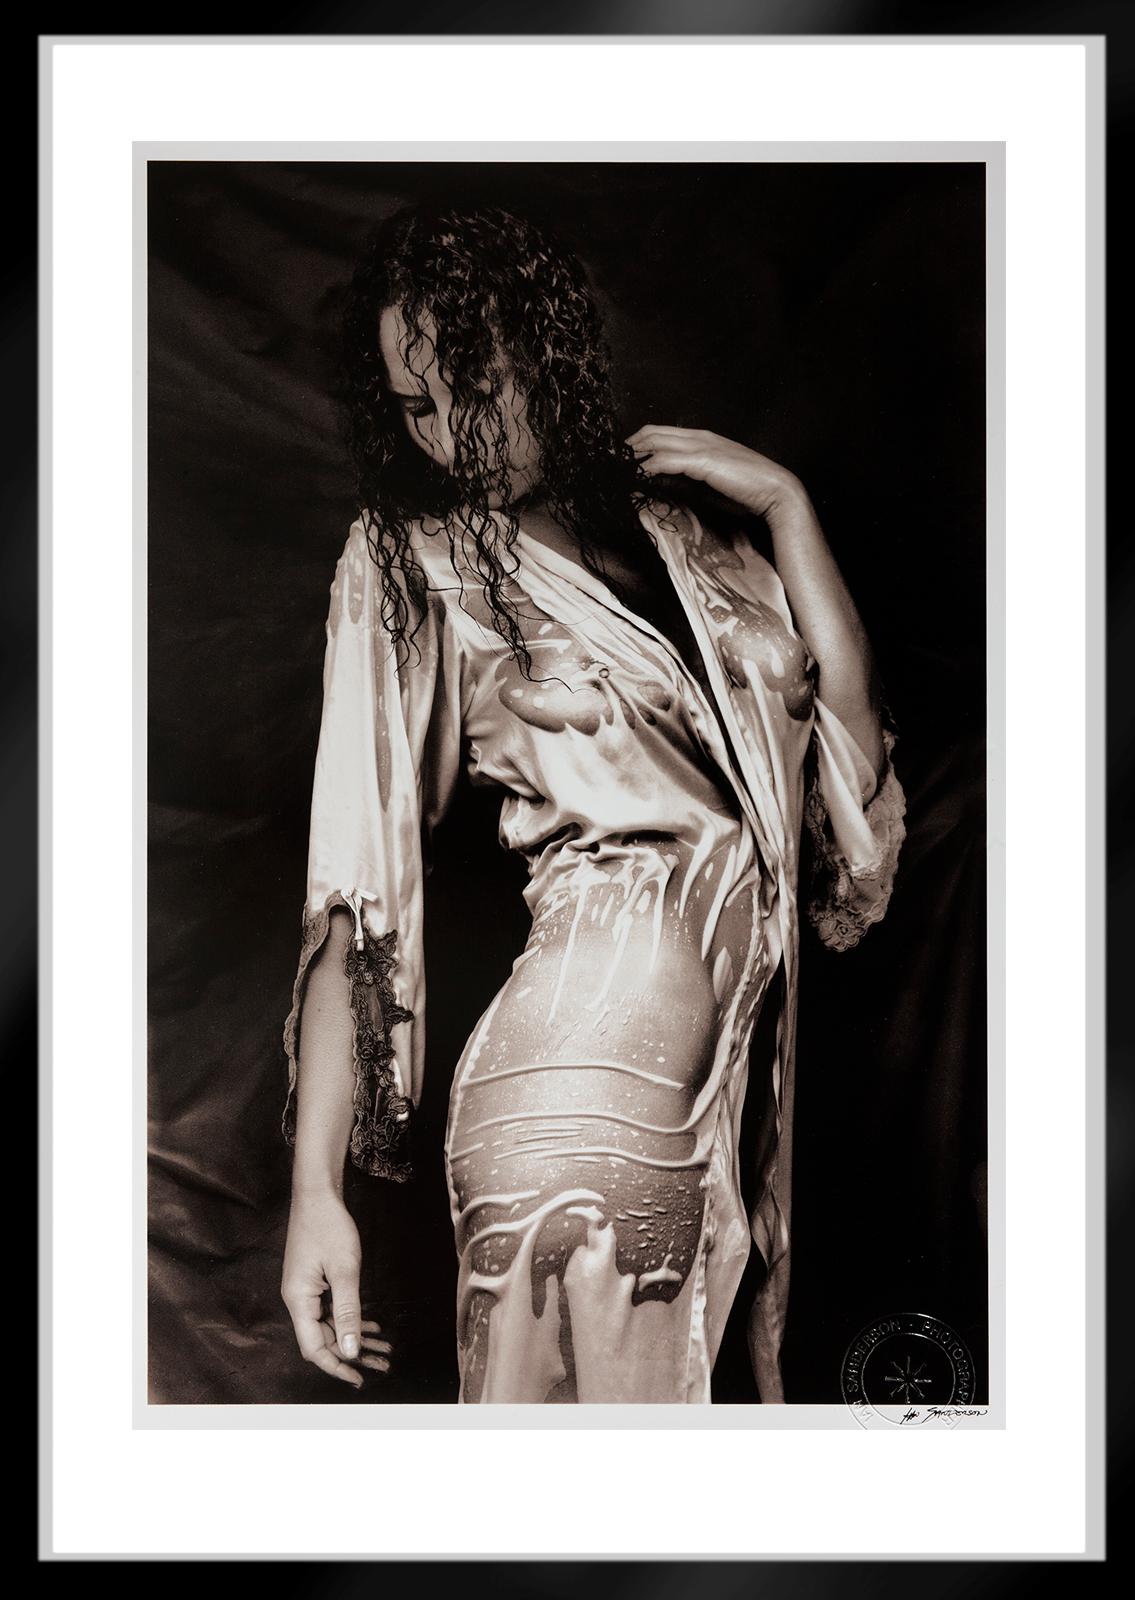 'Nathalie 2' - Signed limited edition Silver Gelatin Lith Print  ,  Edition of 5
Signed, embossed + numbered by artist with certificate of authenticity 
Photography: 2006    ,  Print: 2014

This is a Silver Gelatin print on fiber based photographic